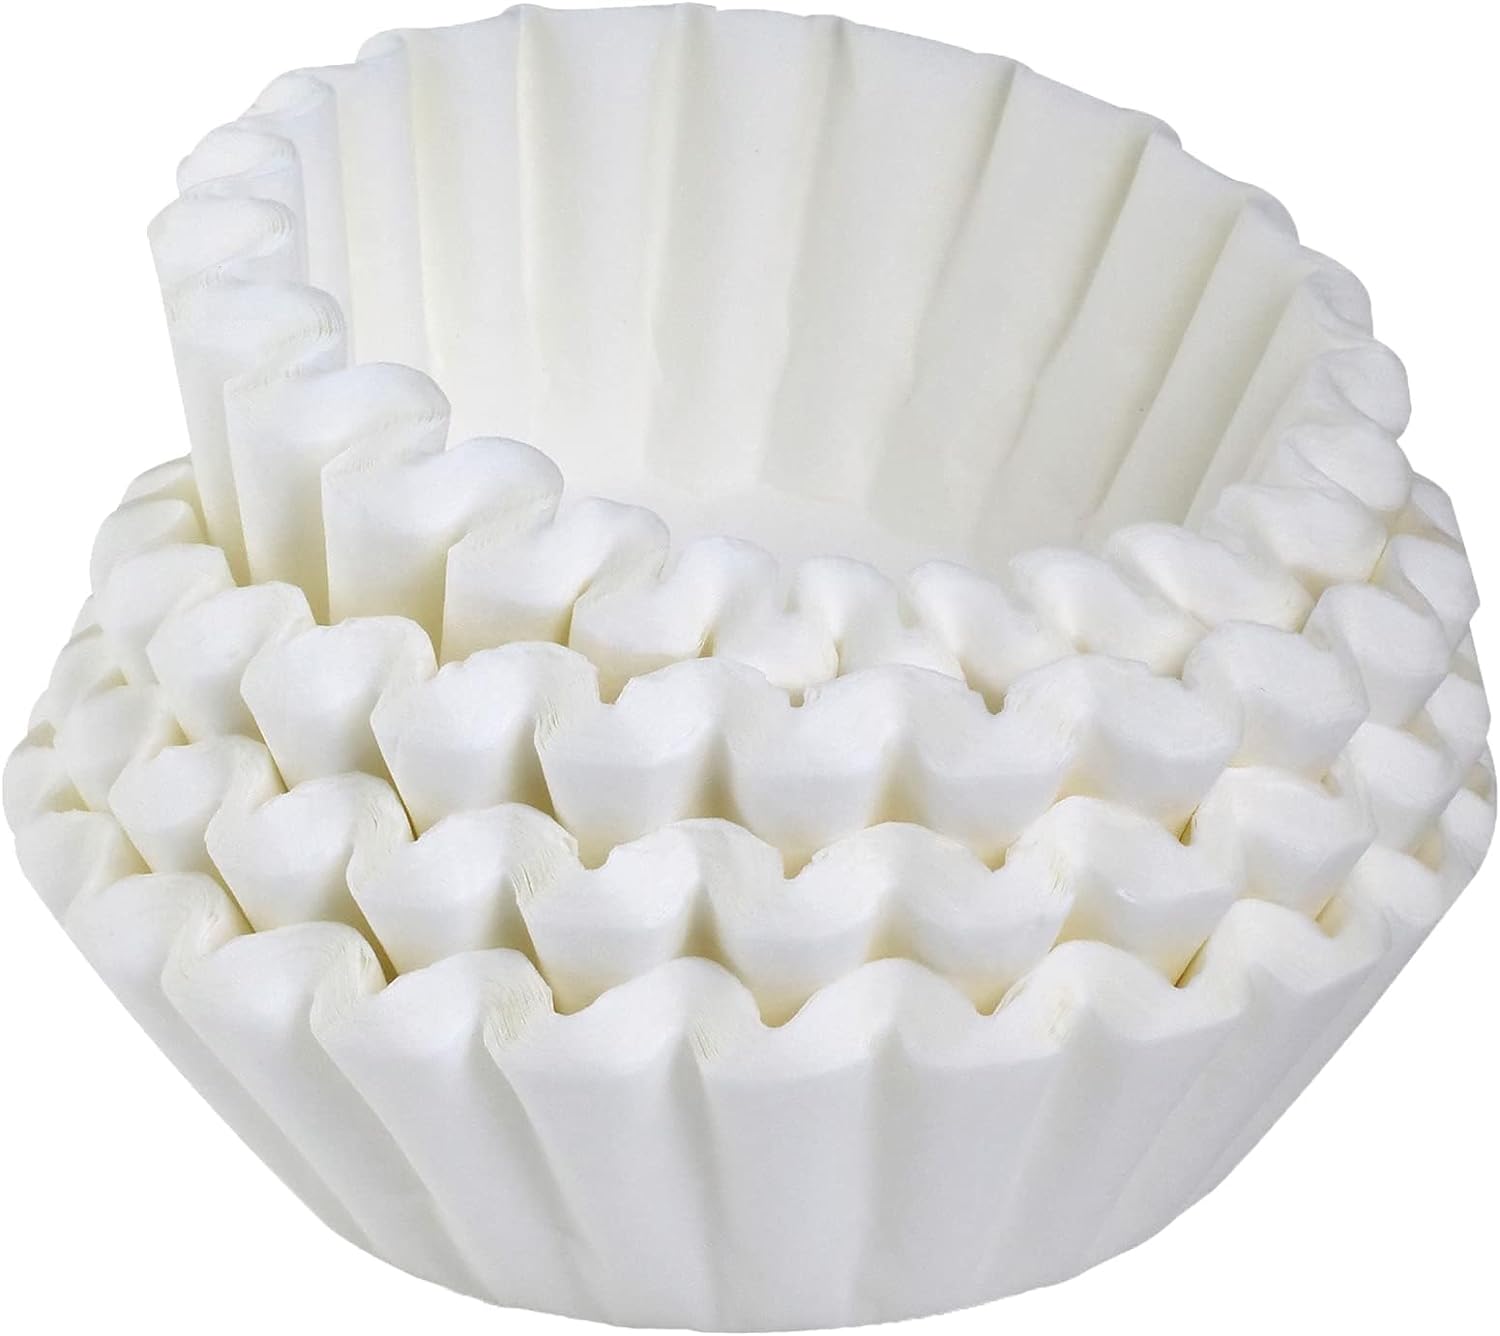 4 Cup Basket Coffee Filters (400, White)